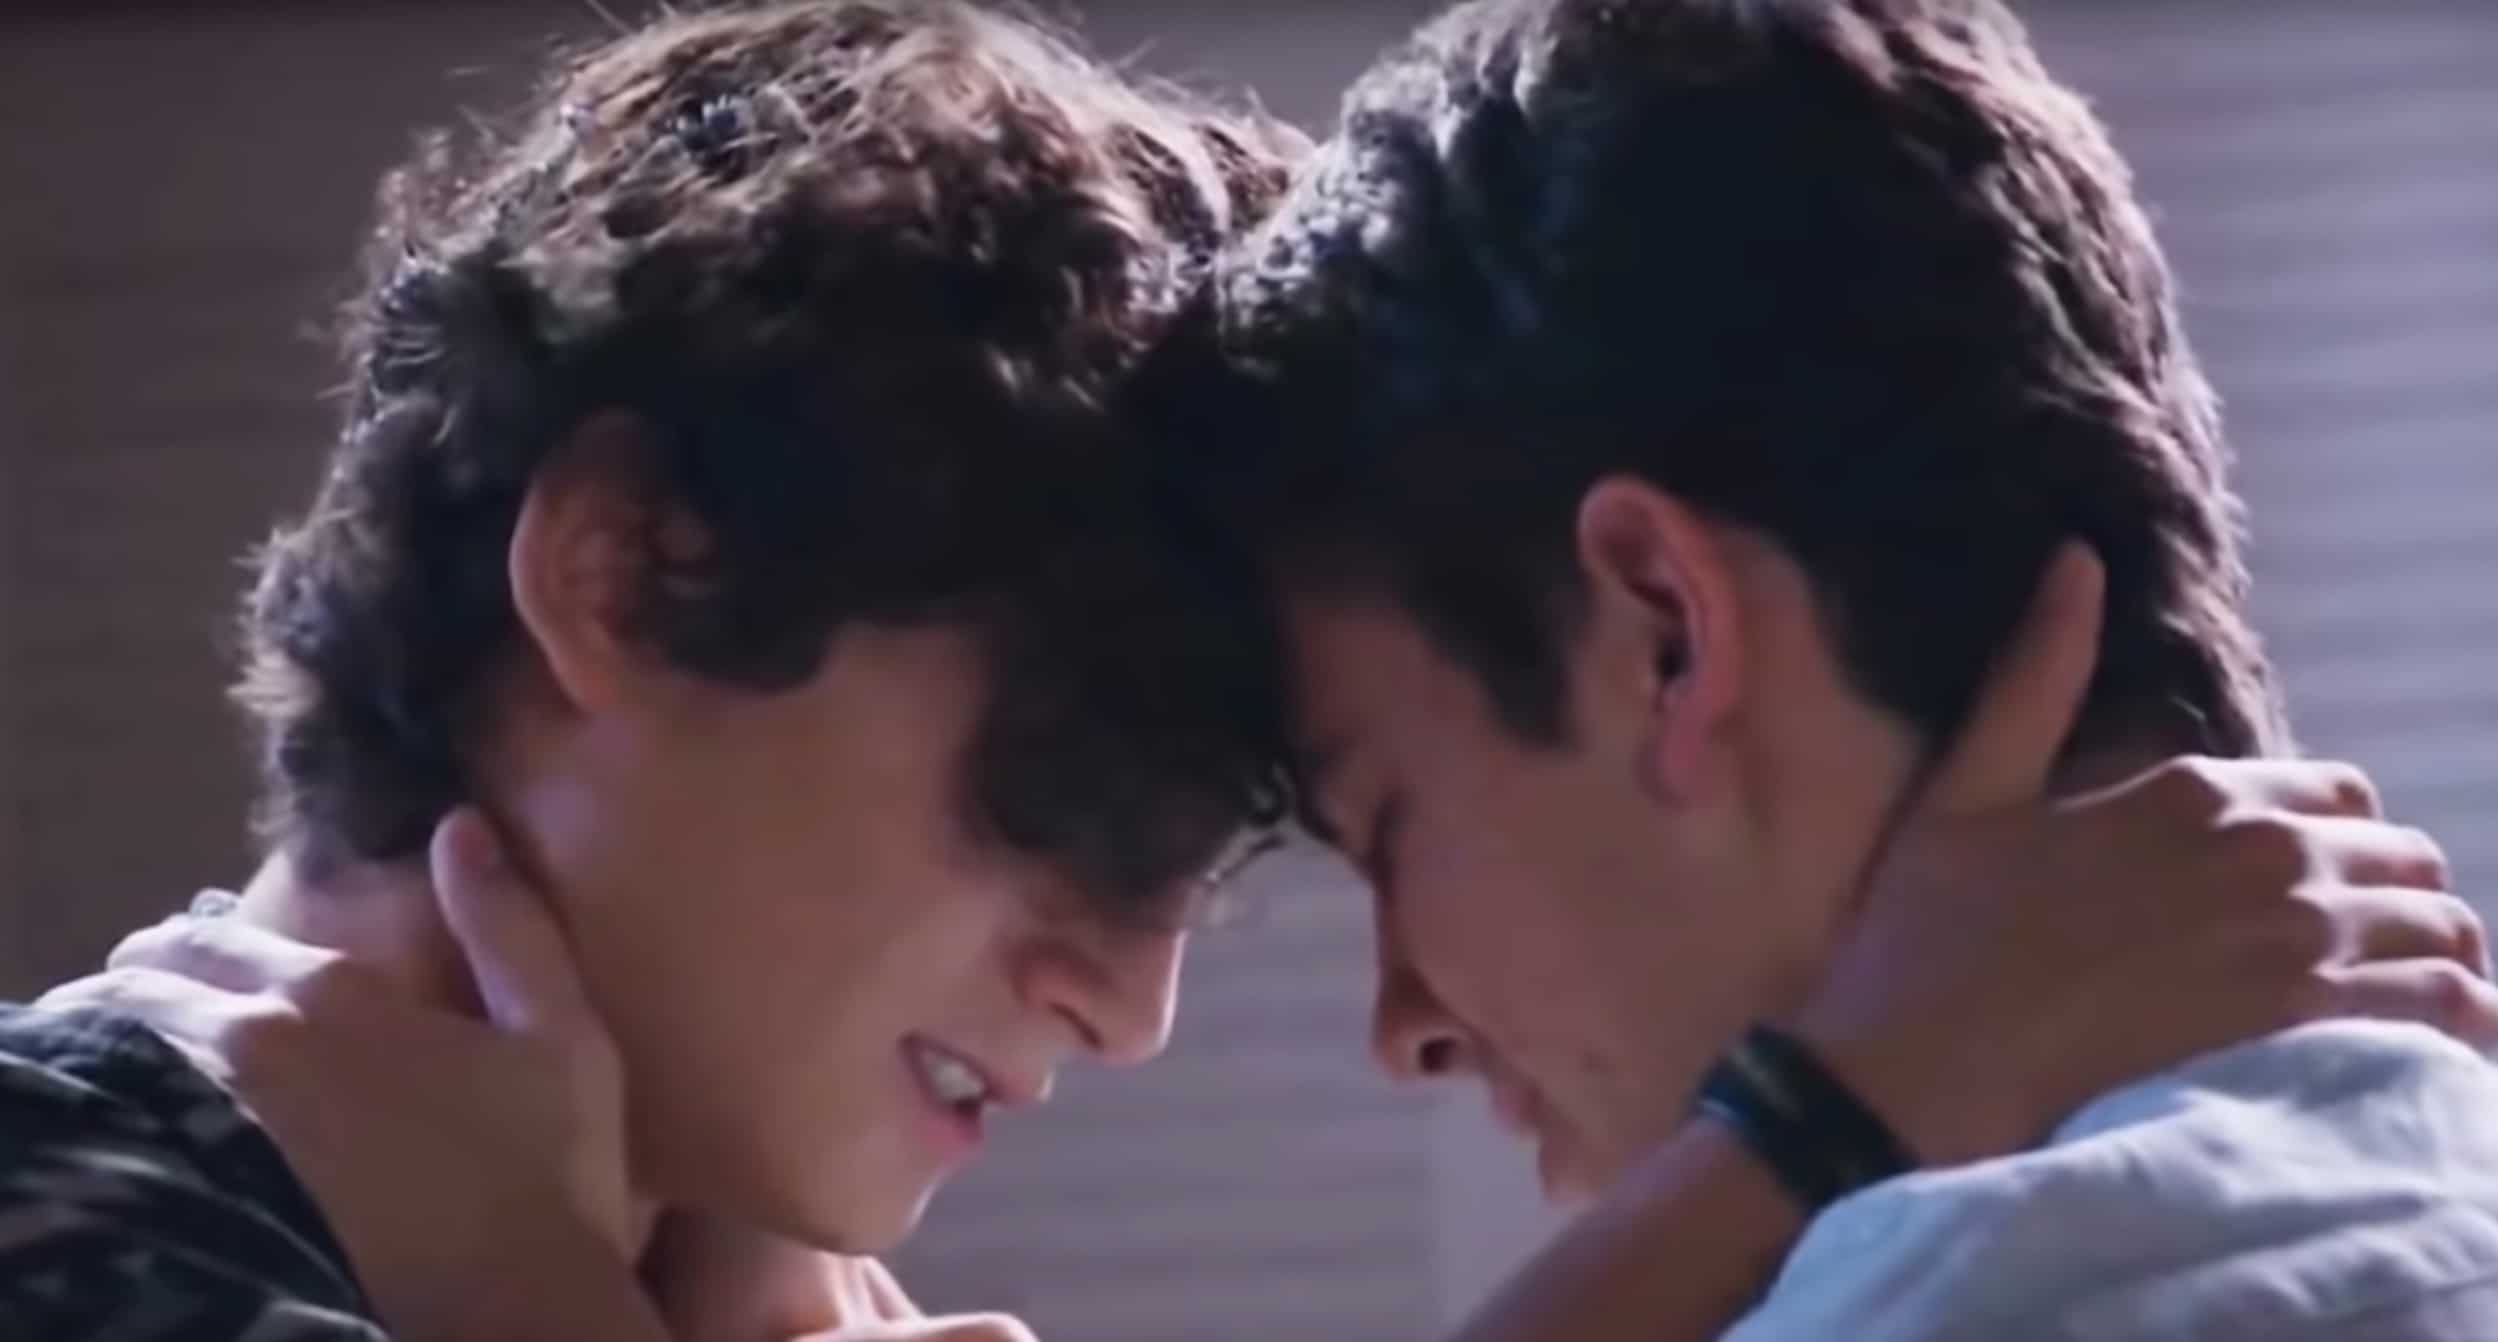 gay romance movies download free